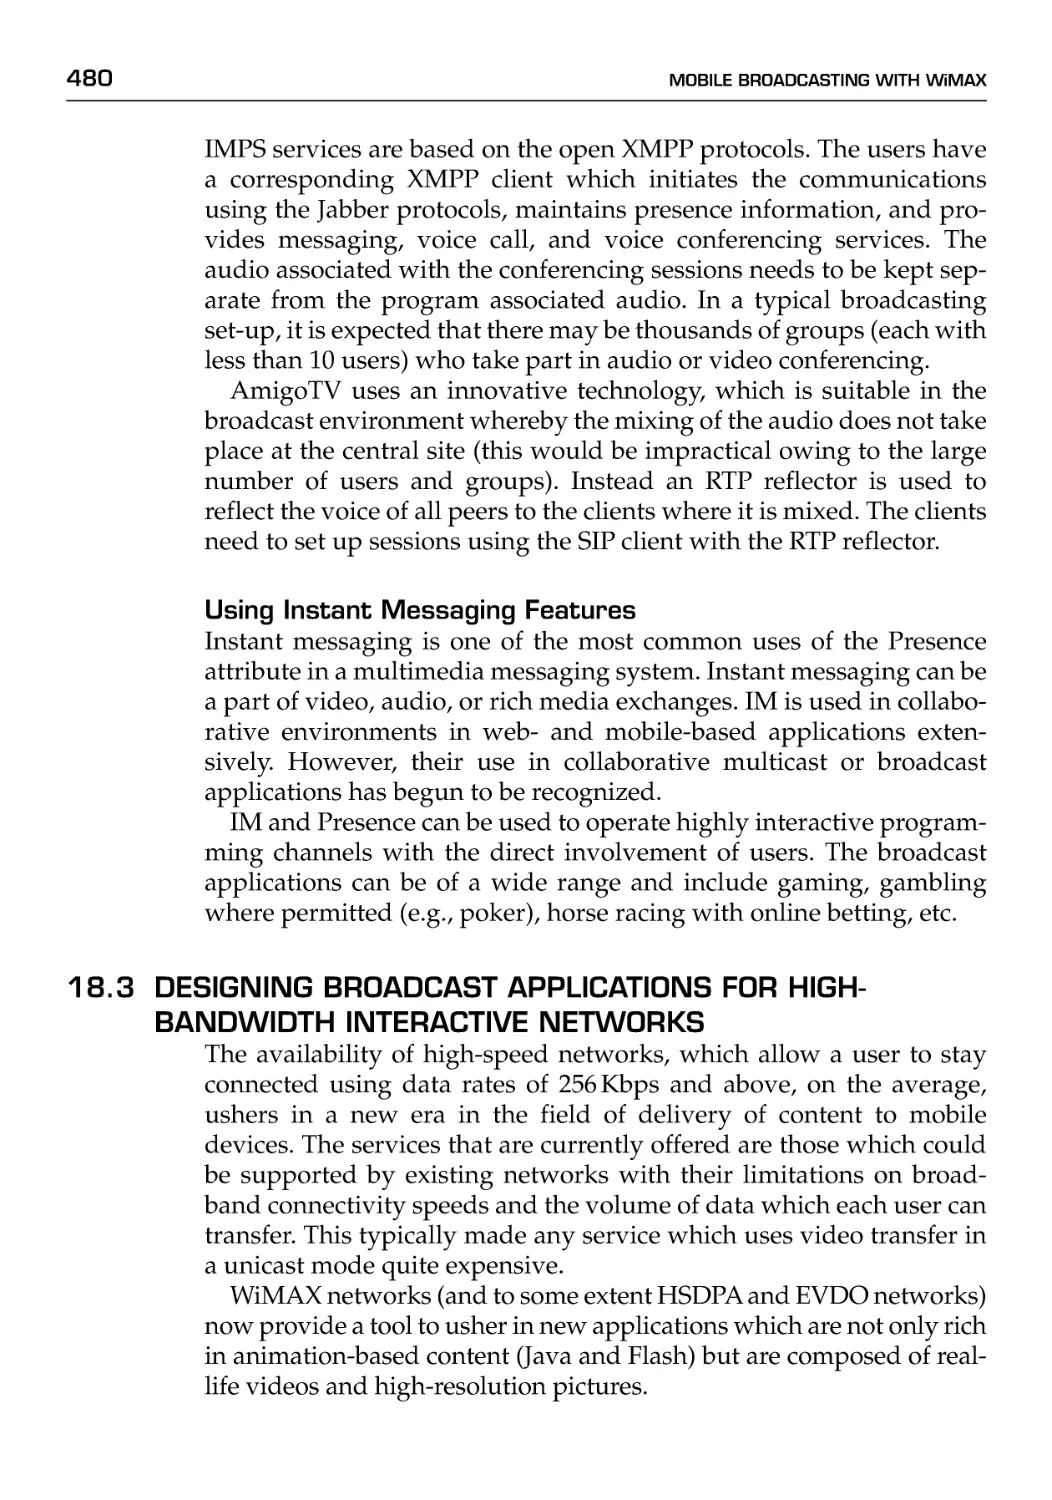 18.3 Designing Broadcast Applications for High-Bandwidth Interactive Networks